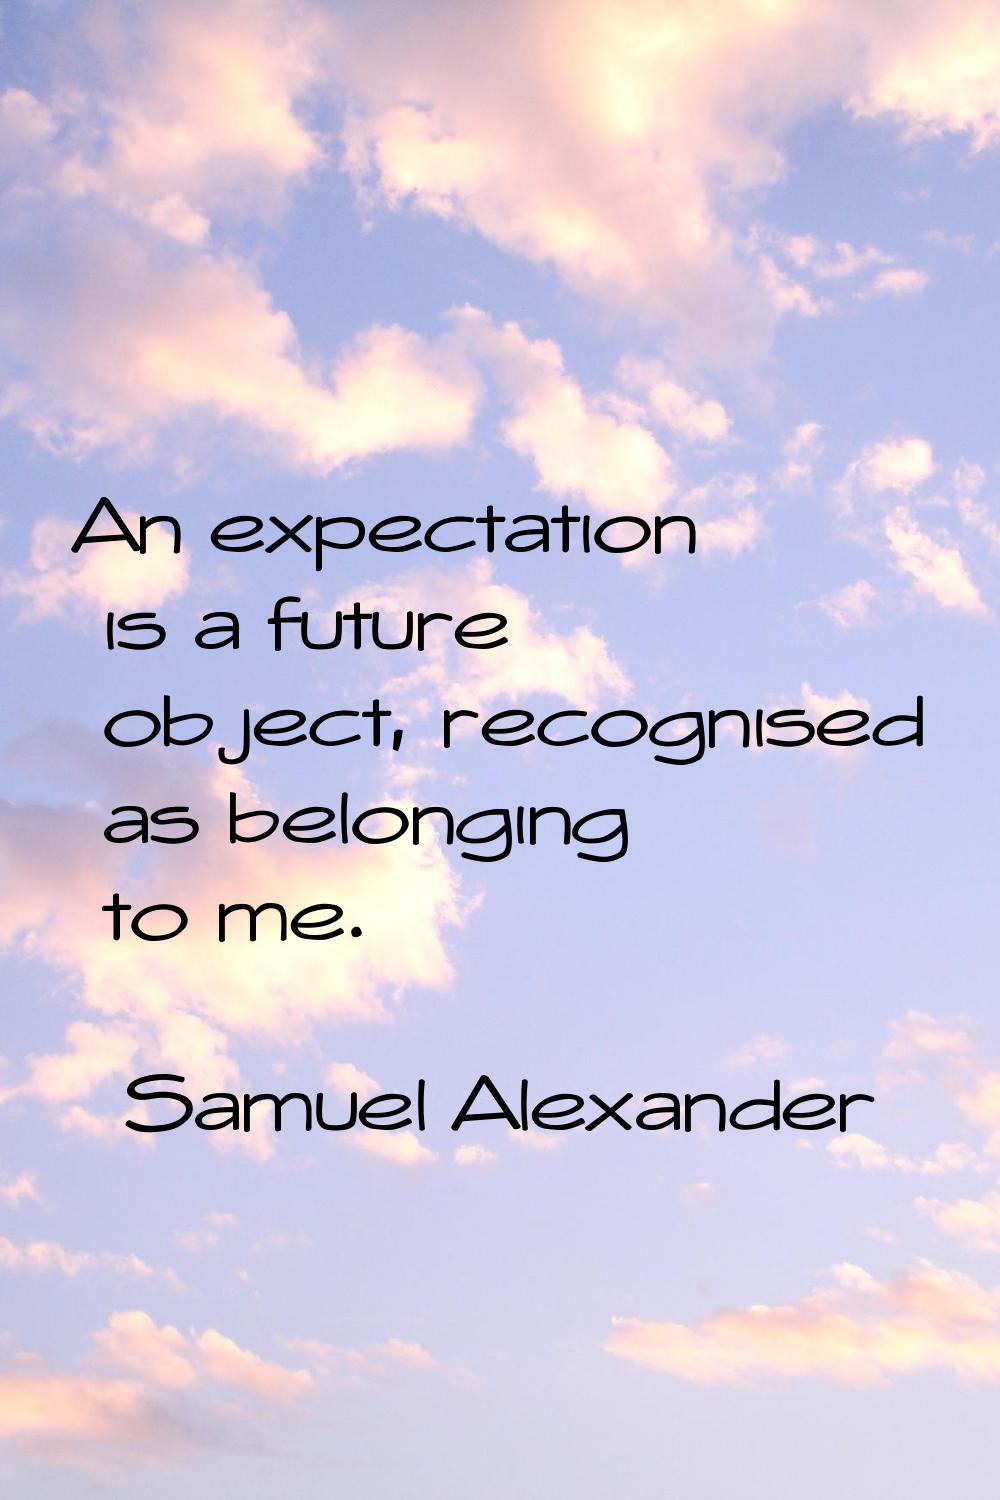 An expectation is a future object, recognised as belonging to me.